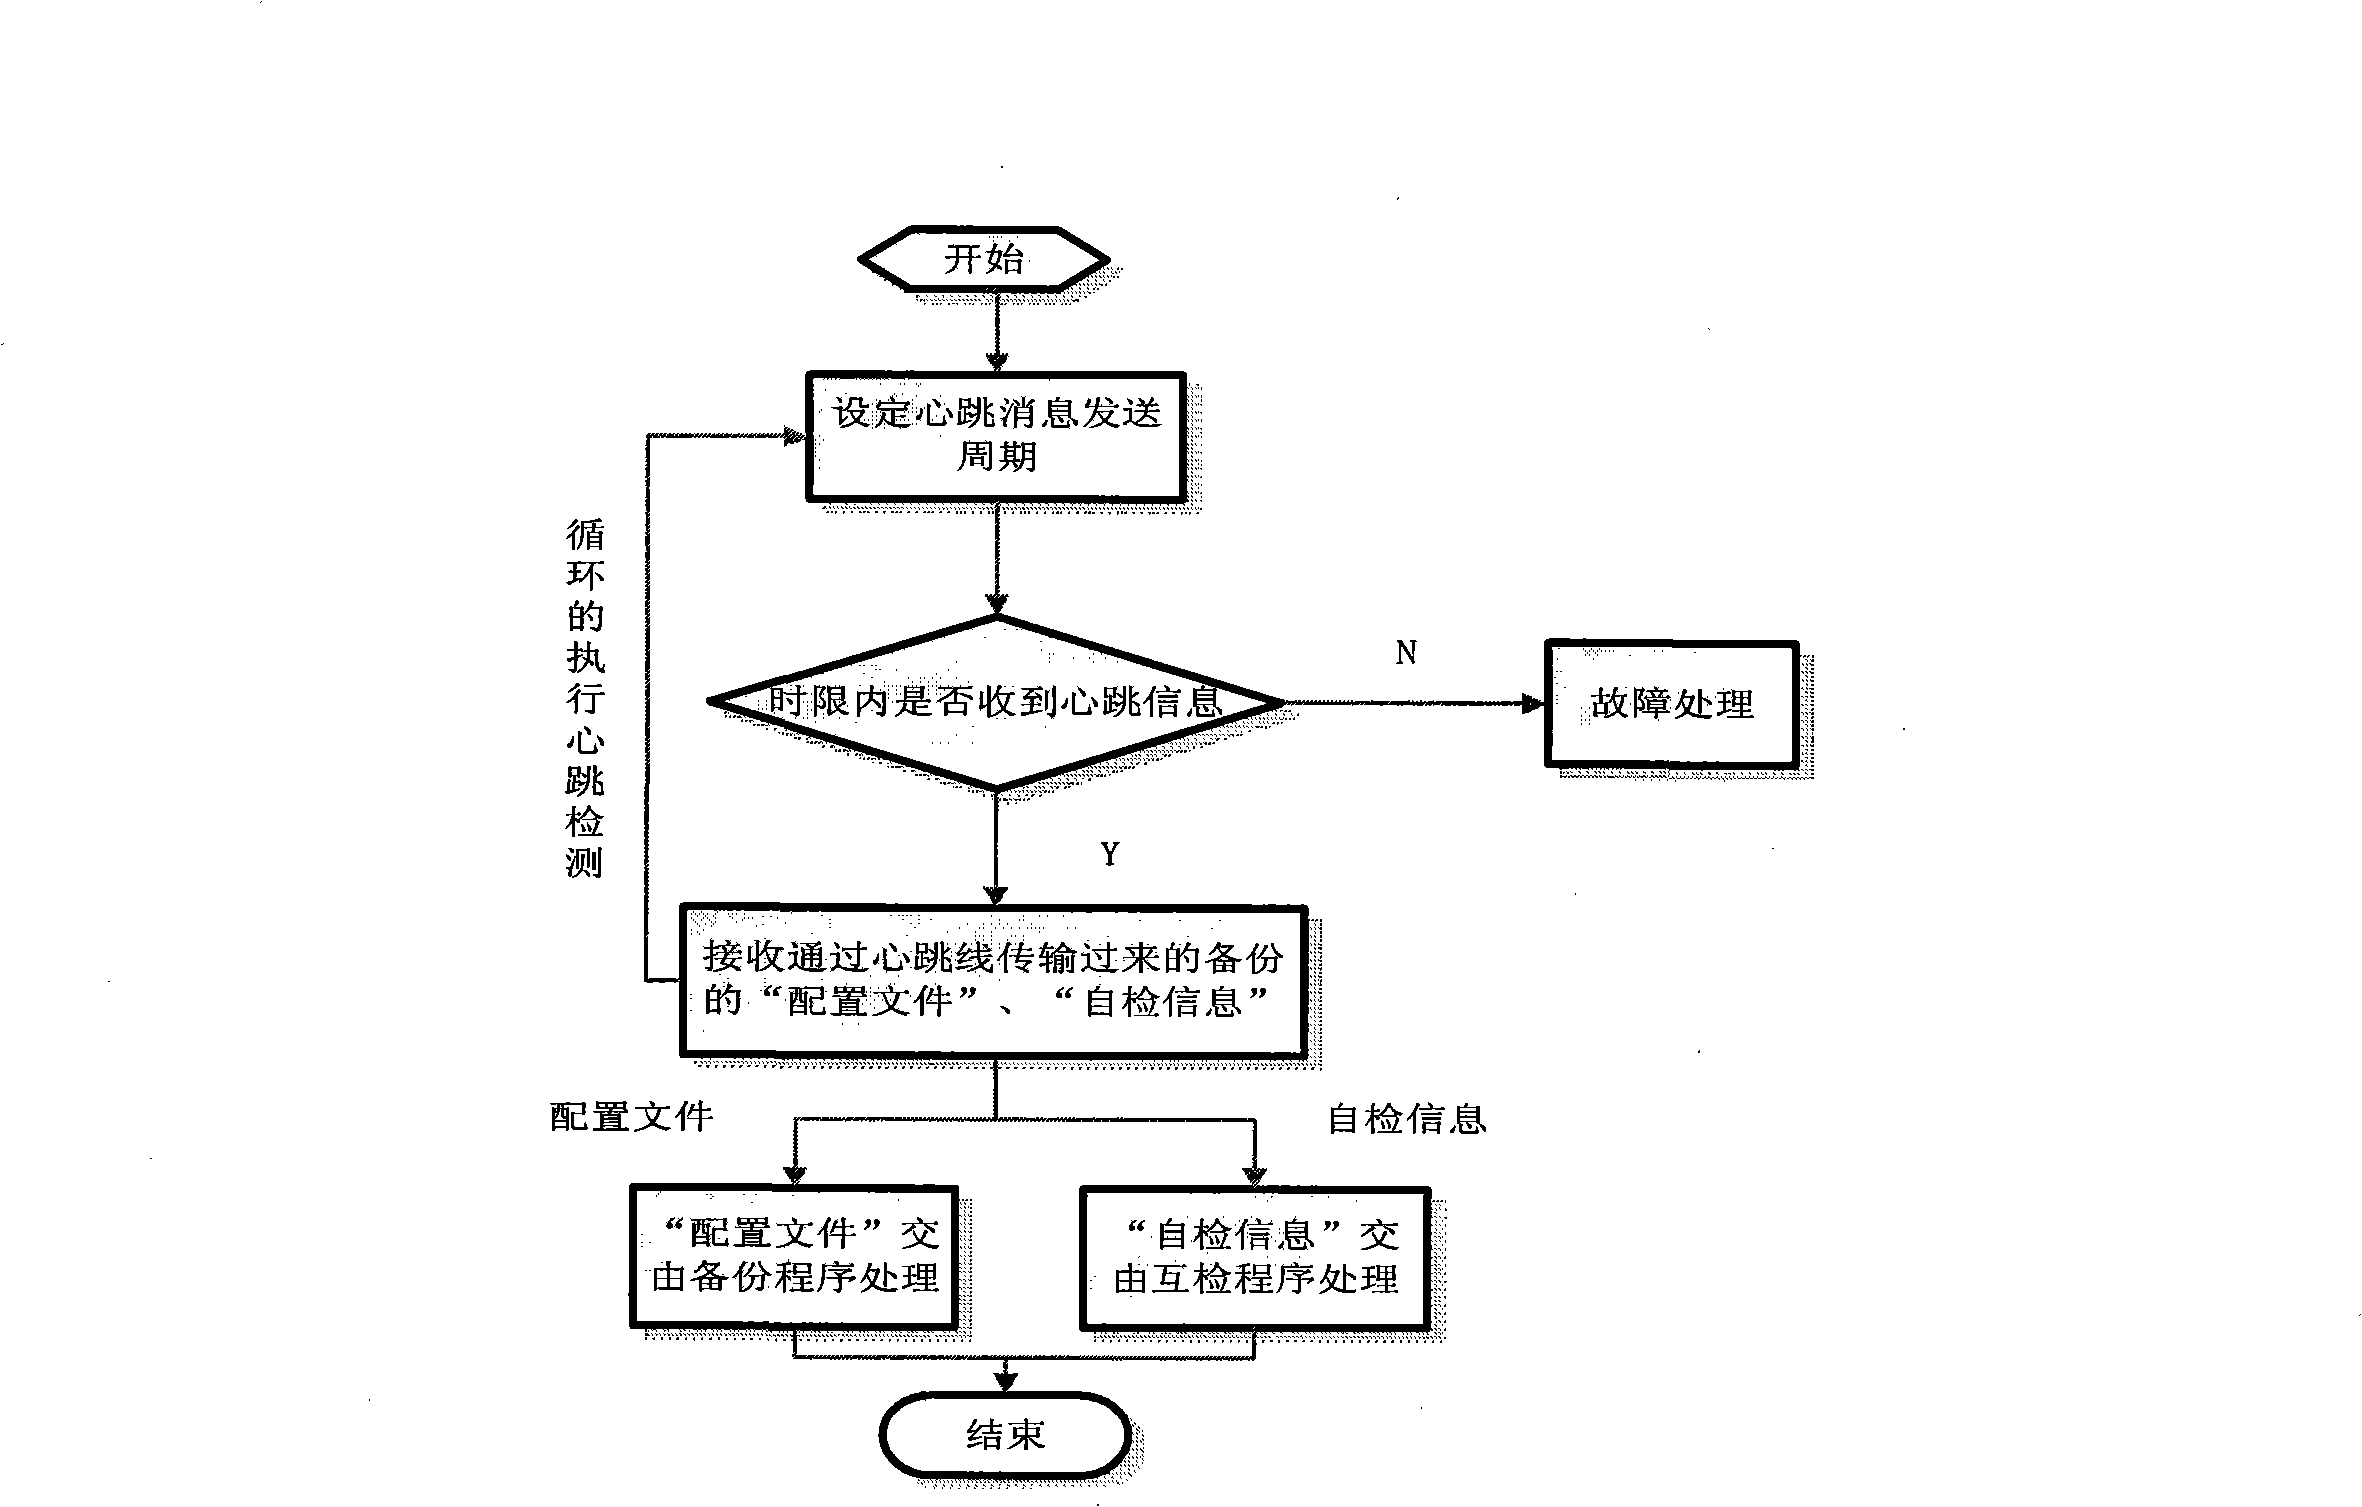 Dynamic fault detection system for dual controller disk array